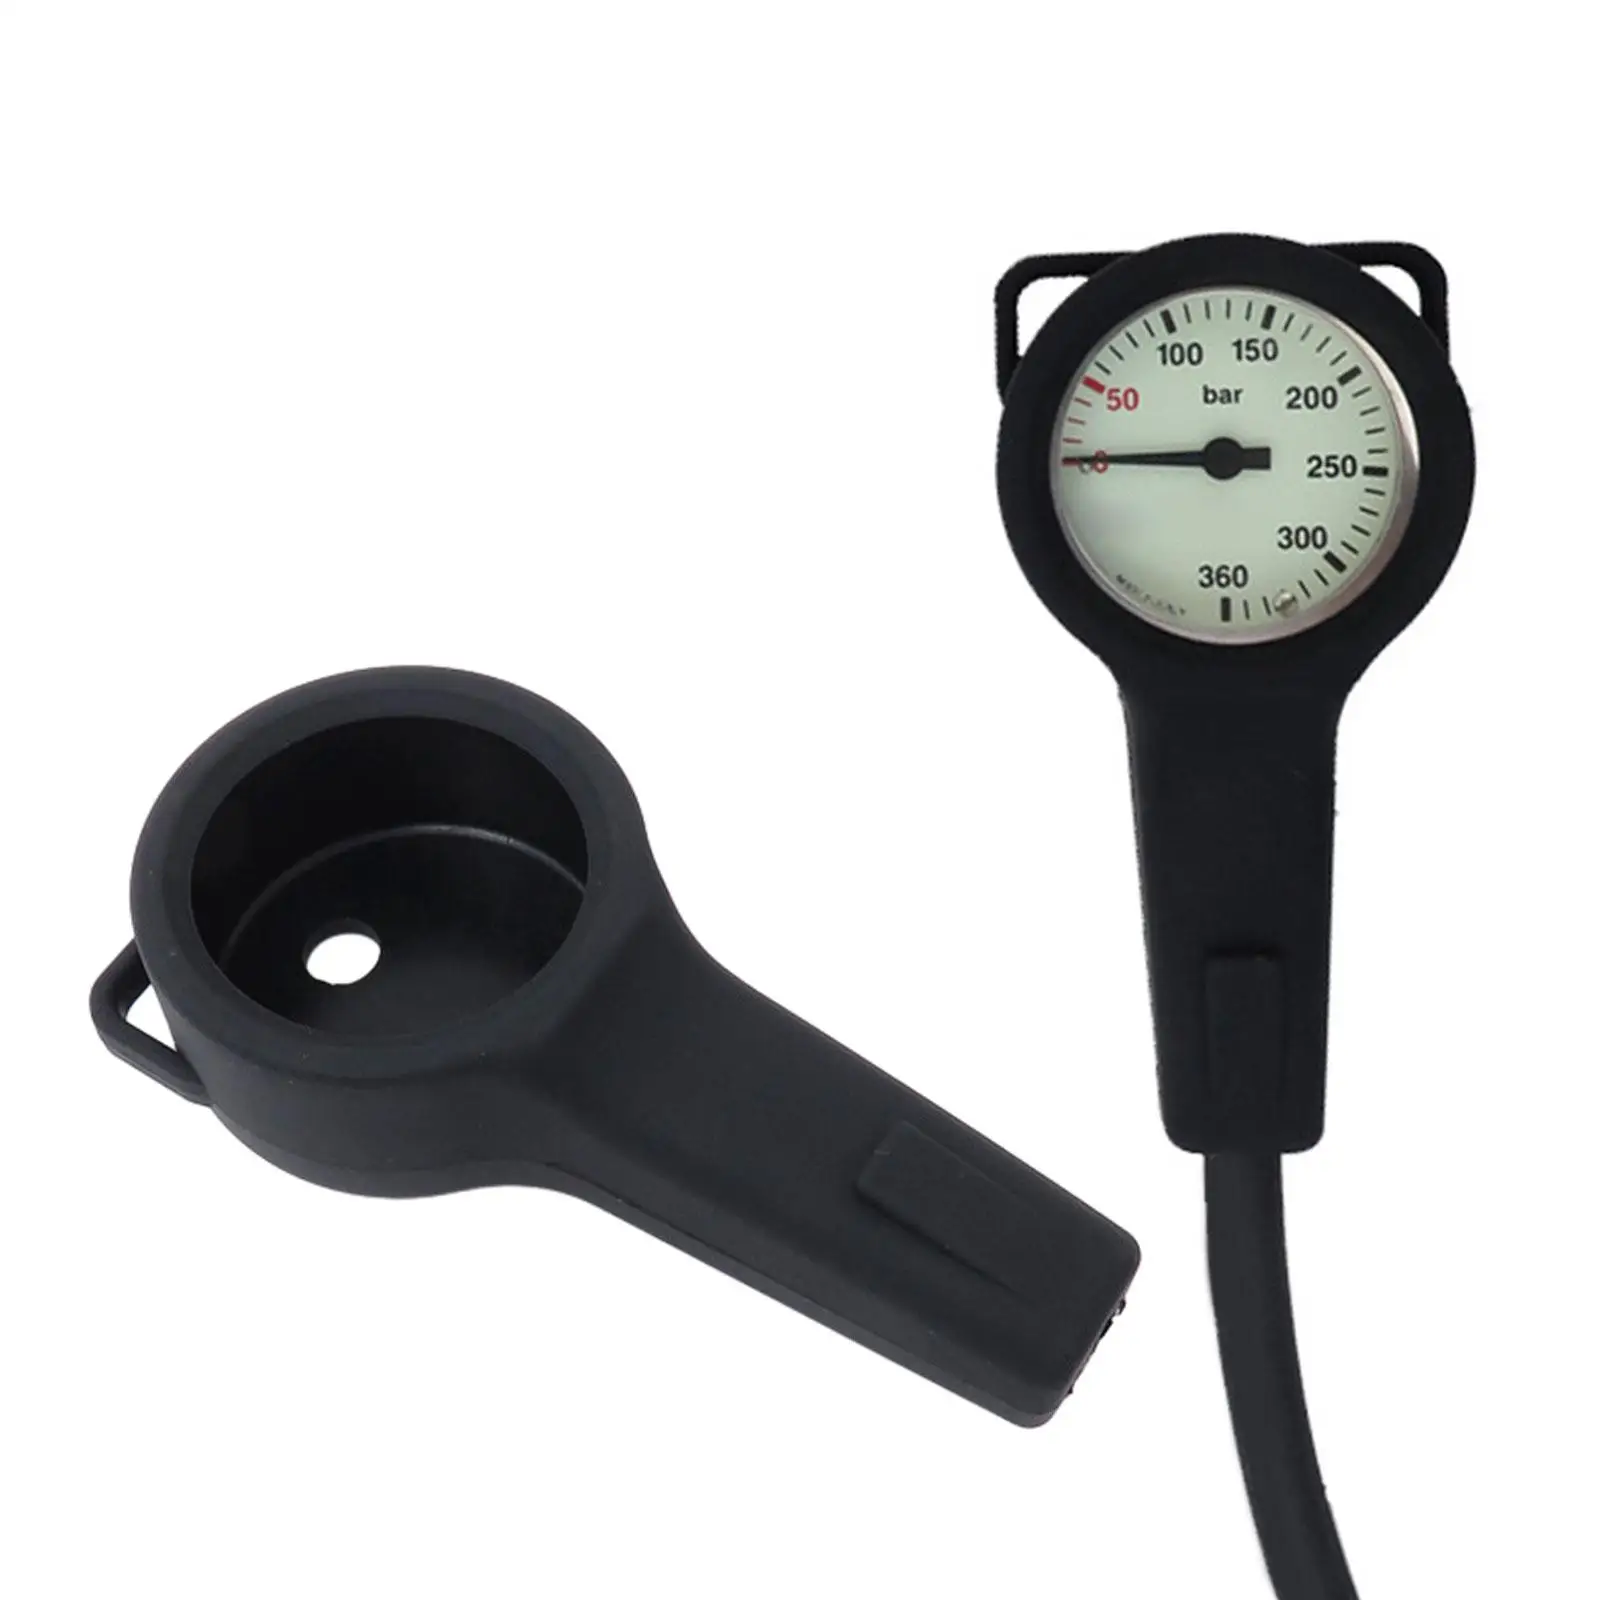 Scuba Pressure Gauge Boot Protection from Bumps, Scratches, Wear and Tear